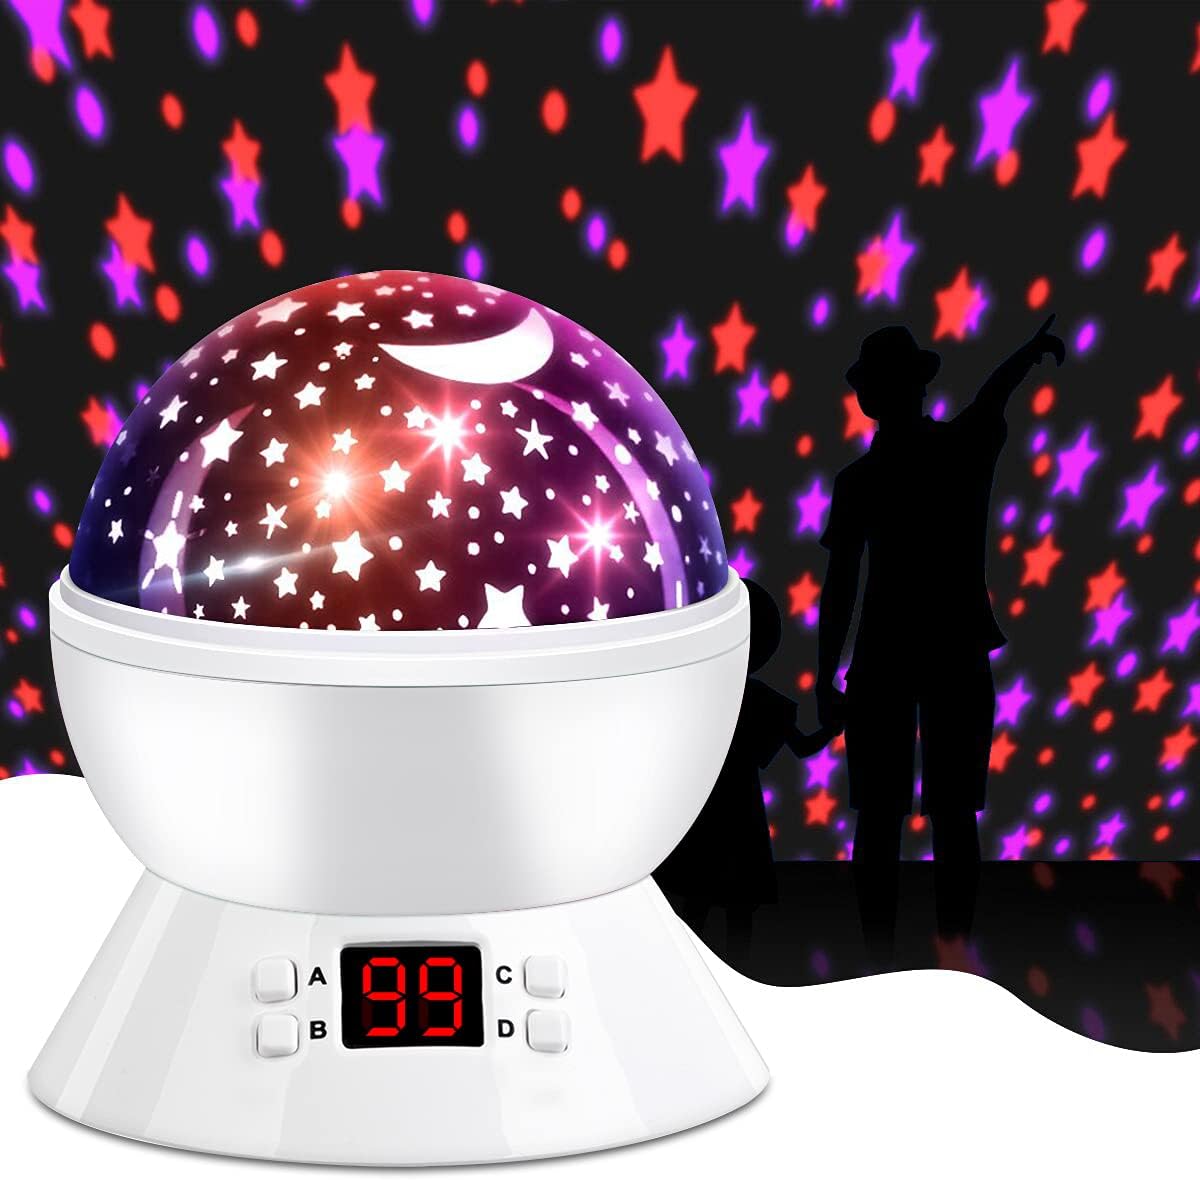 Night Light Projector Timing Control 2 use 360° Rotatable Luminous Starry Sky and 8 Light Projector Black Birthday Decoration Star Projector Night Light Suitable for Children's Room Party